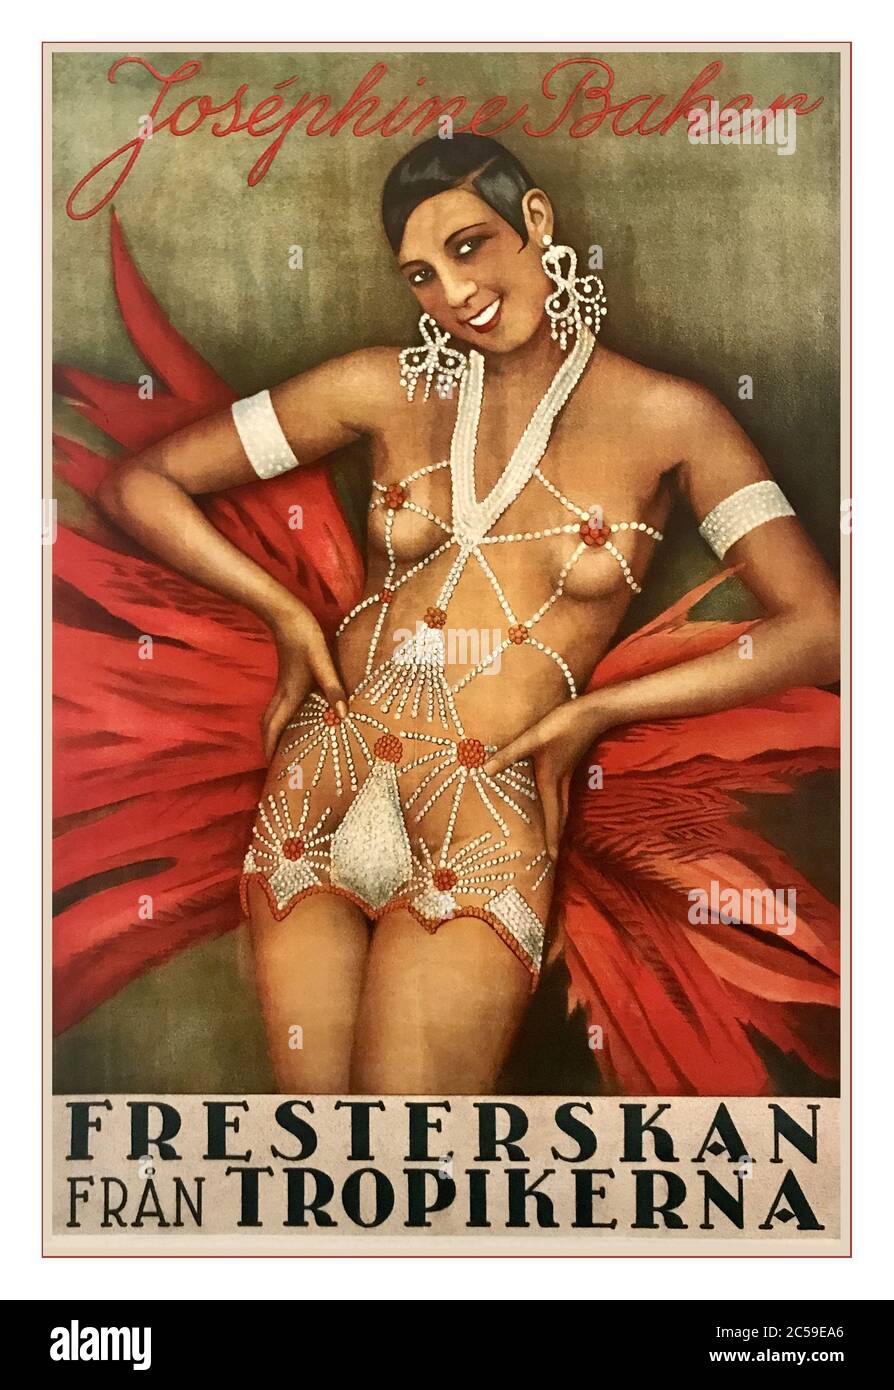 FOLLIES BERGERES ARCHIVE VINTAGE POSTER 1900’s Josephine Baker in her Follies Bergeres “pearl and feather costume.” Paris spectacle theatre Poster. A Swedish poster of “la Josephine” in her trademark Follies Bergeres pearls and feathers costume. This artwork was on the 1927 theatre programme for the Follies Bergeres Paris France. 'FRESTERSKAN  Fran TROPIKERNA'  ' Temptress of The Tropics' Stock Photo